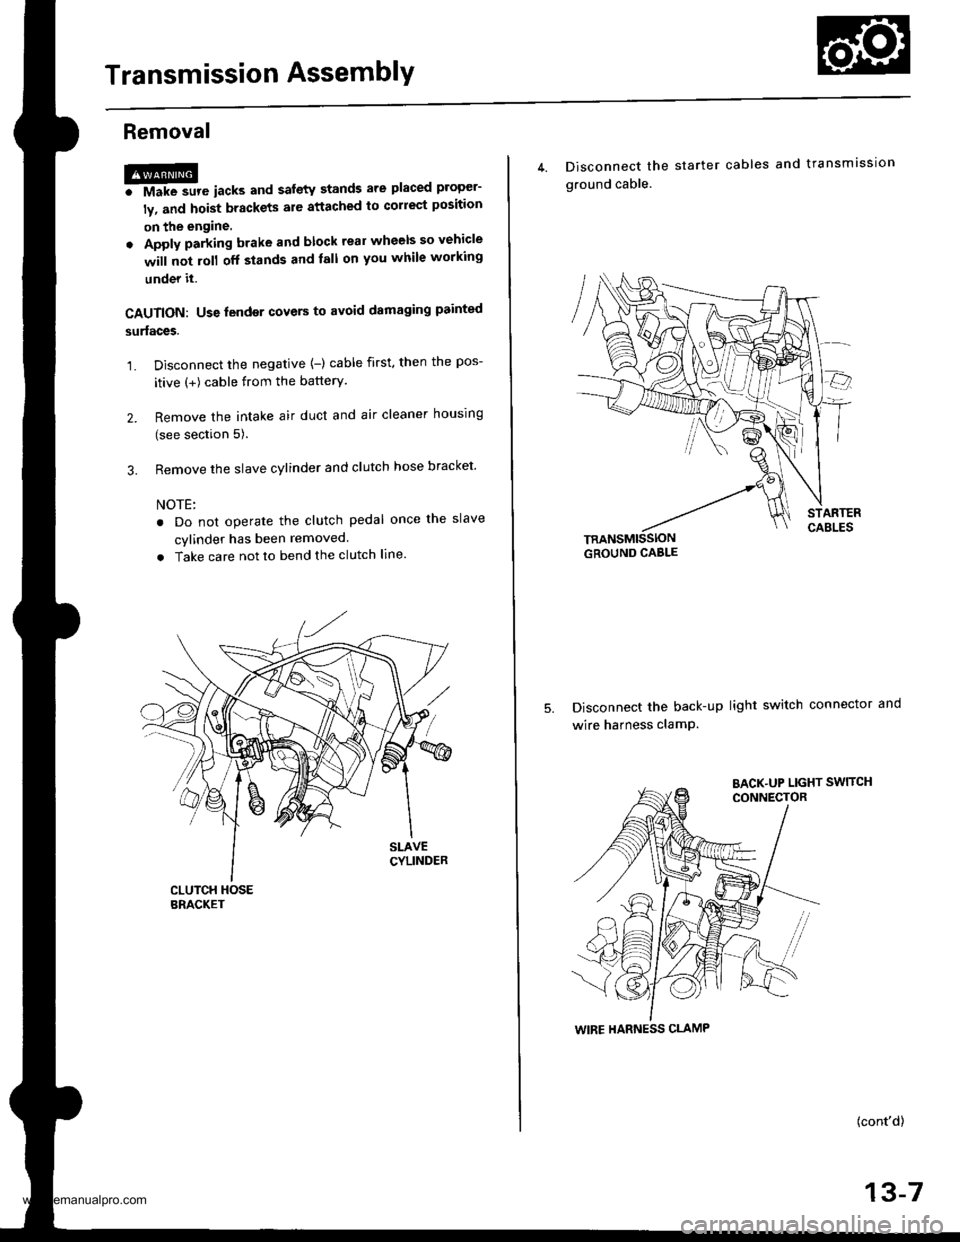 HONDA CR-V 1999 RD1-RD3 / 1.G Owners Guide 
Transmission AssemblY
Removal
@FMak. sw. iack" and safety stands are placed propel-
ly, and hoist brackets are attached to collect position
on the engine,
. Apply parking brake and block rear wheels 